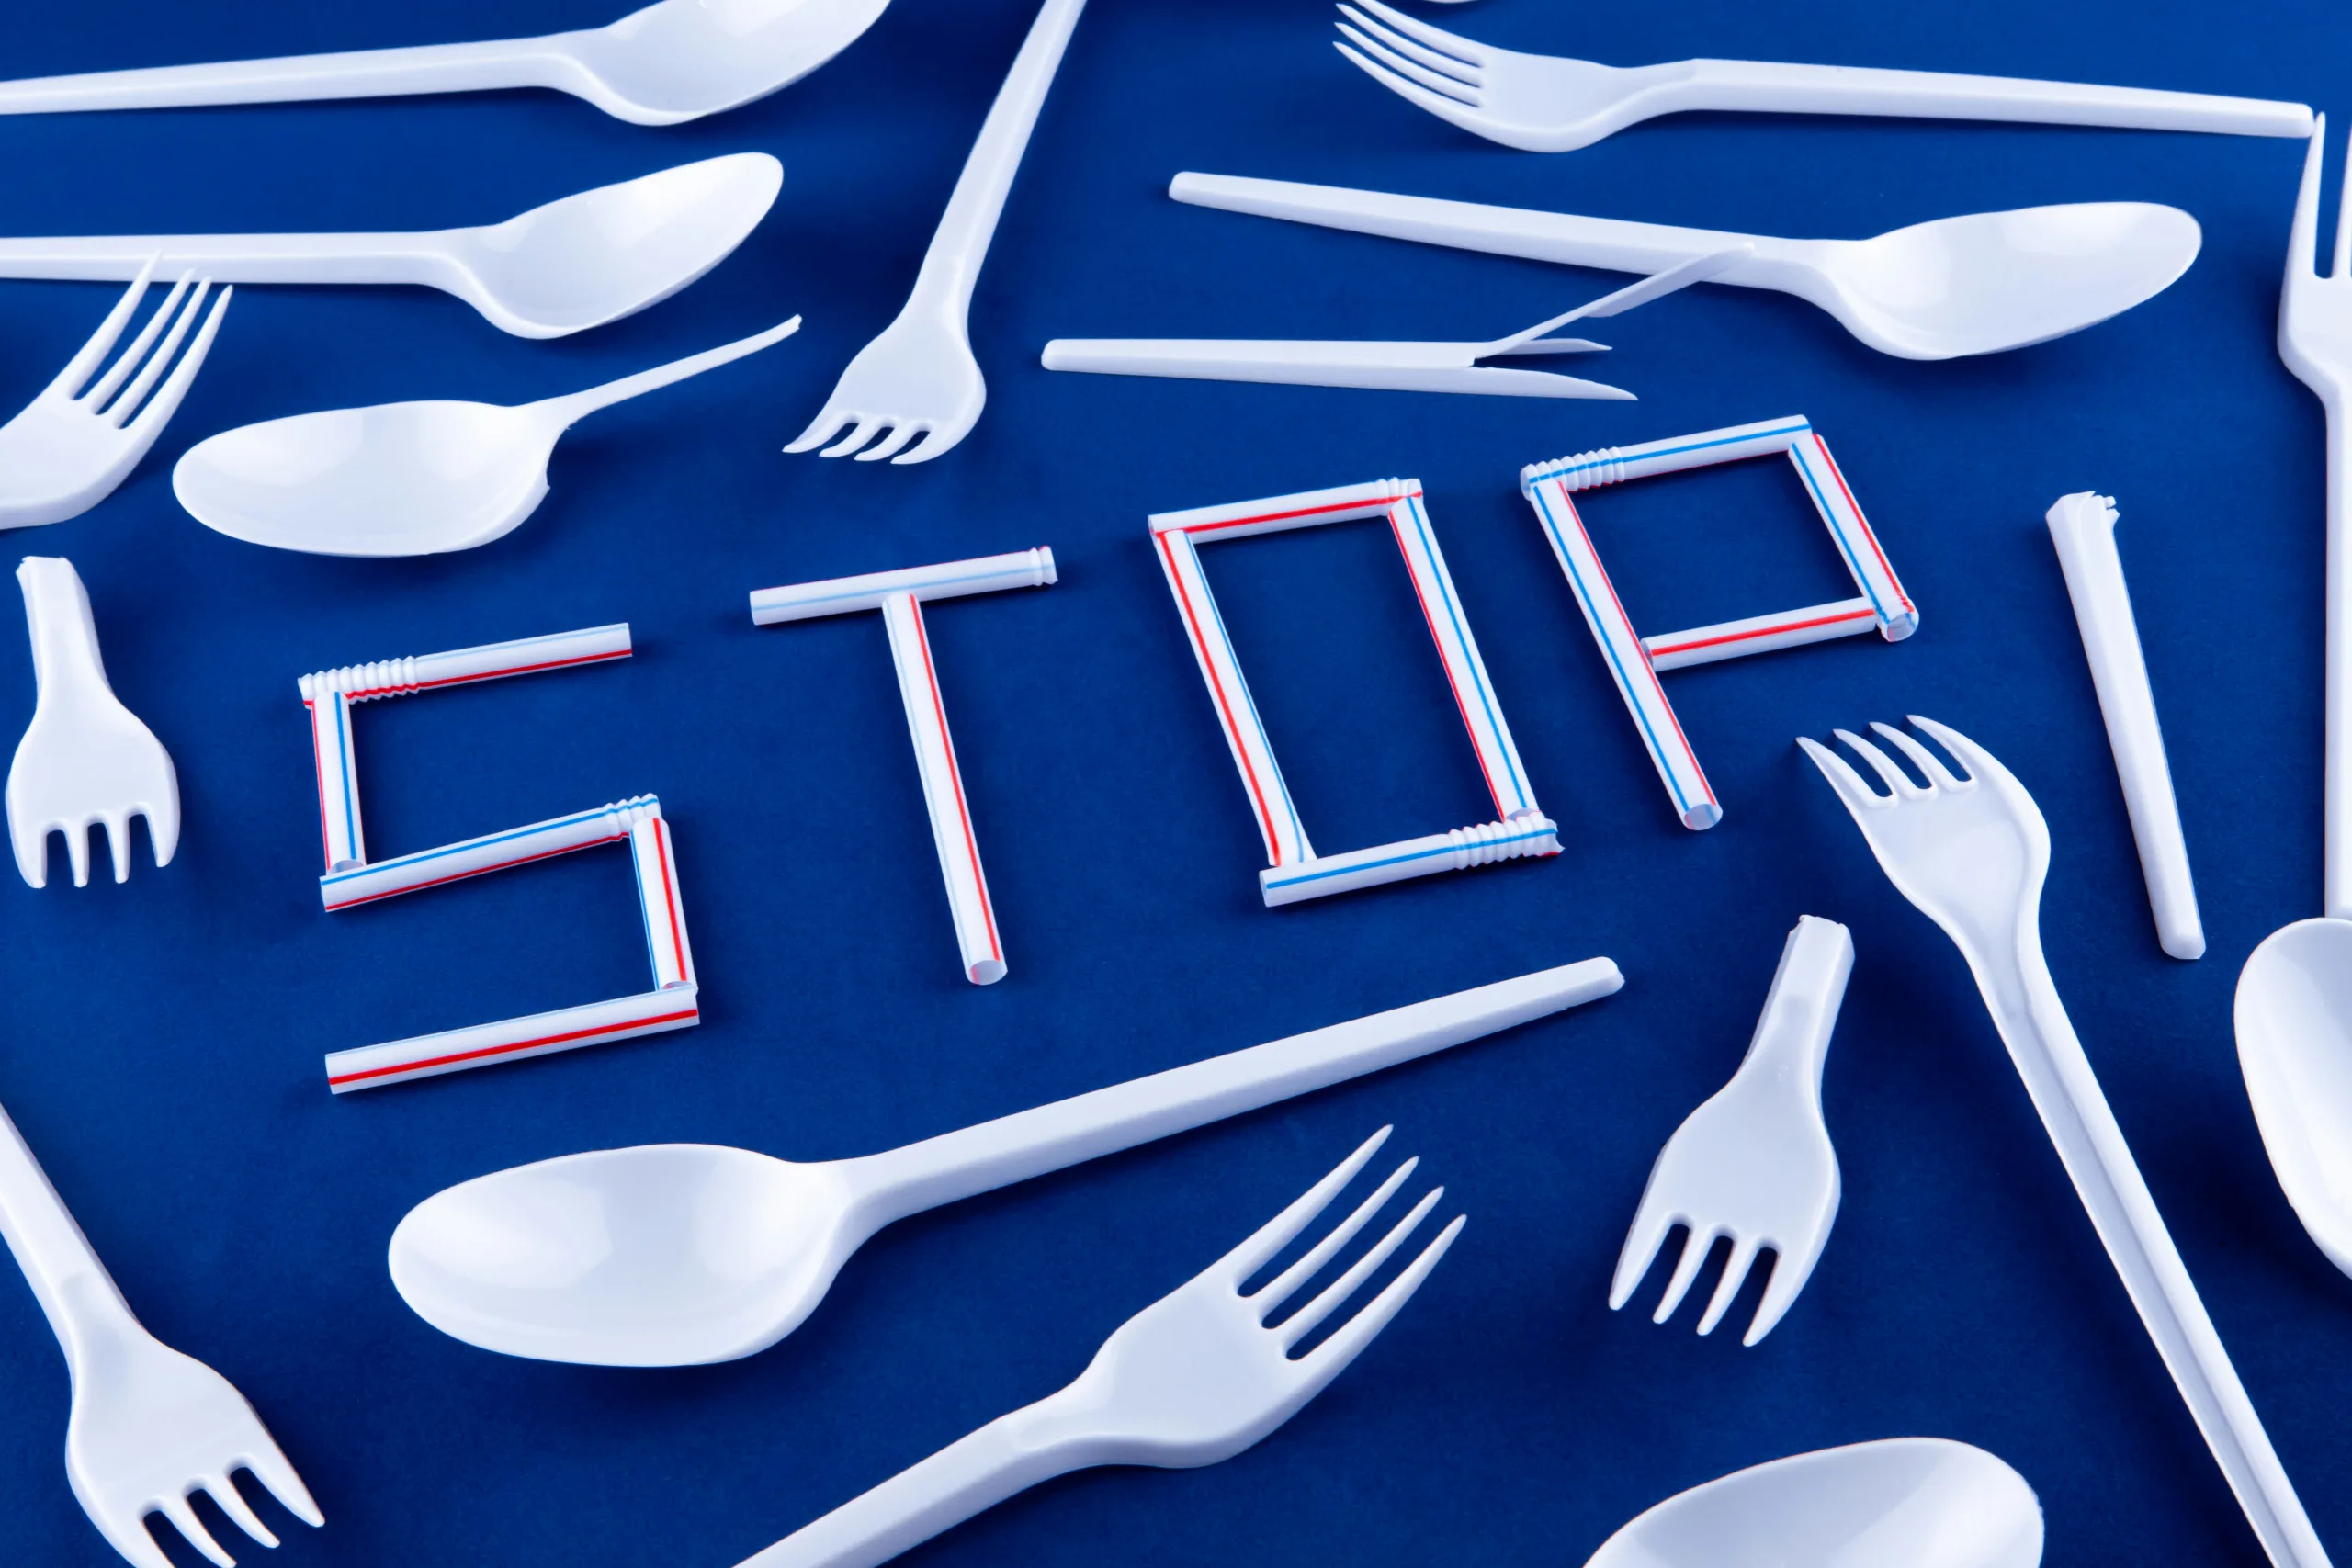 the word stop made out of plastic straws and spoons on a blue background